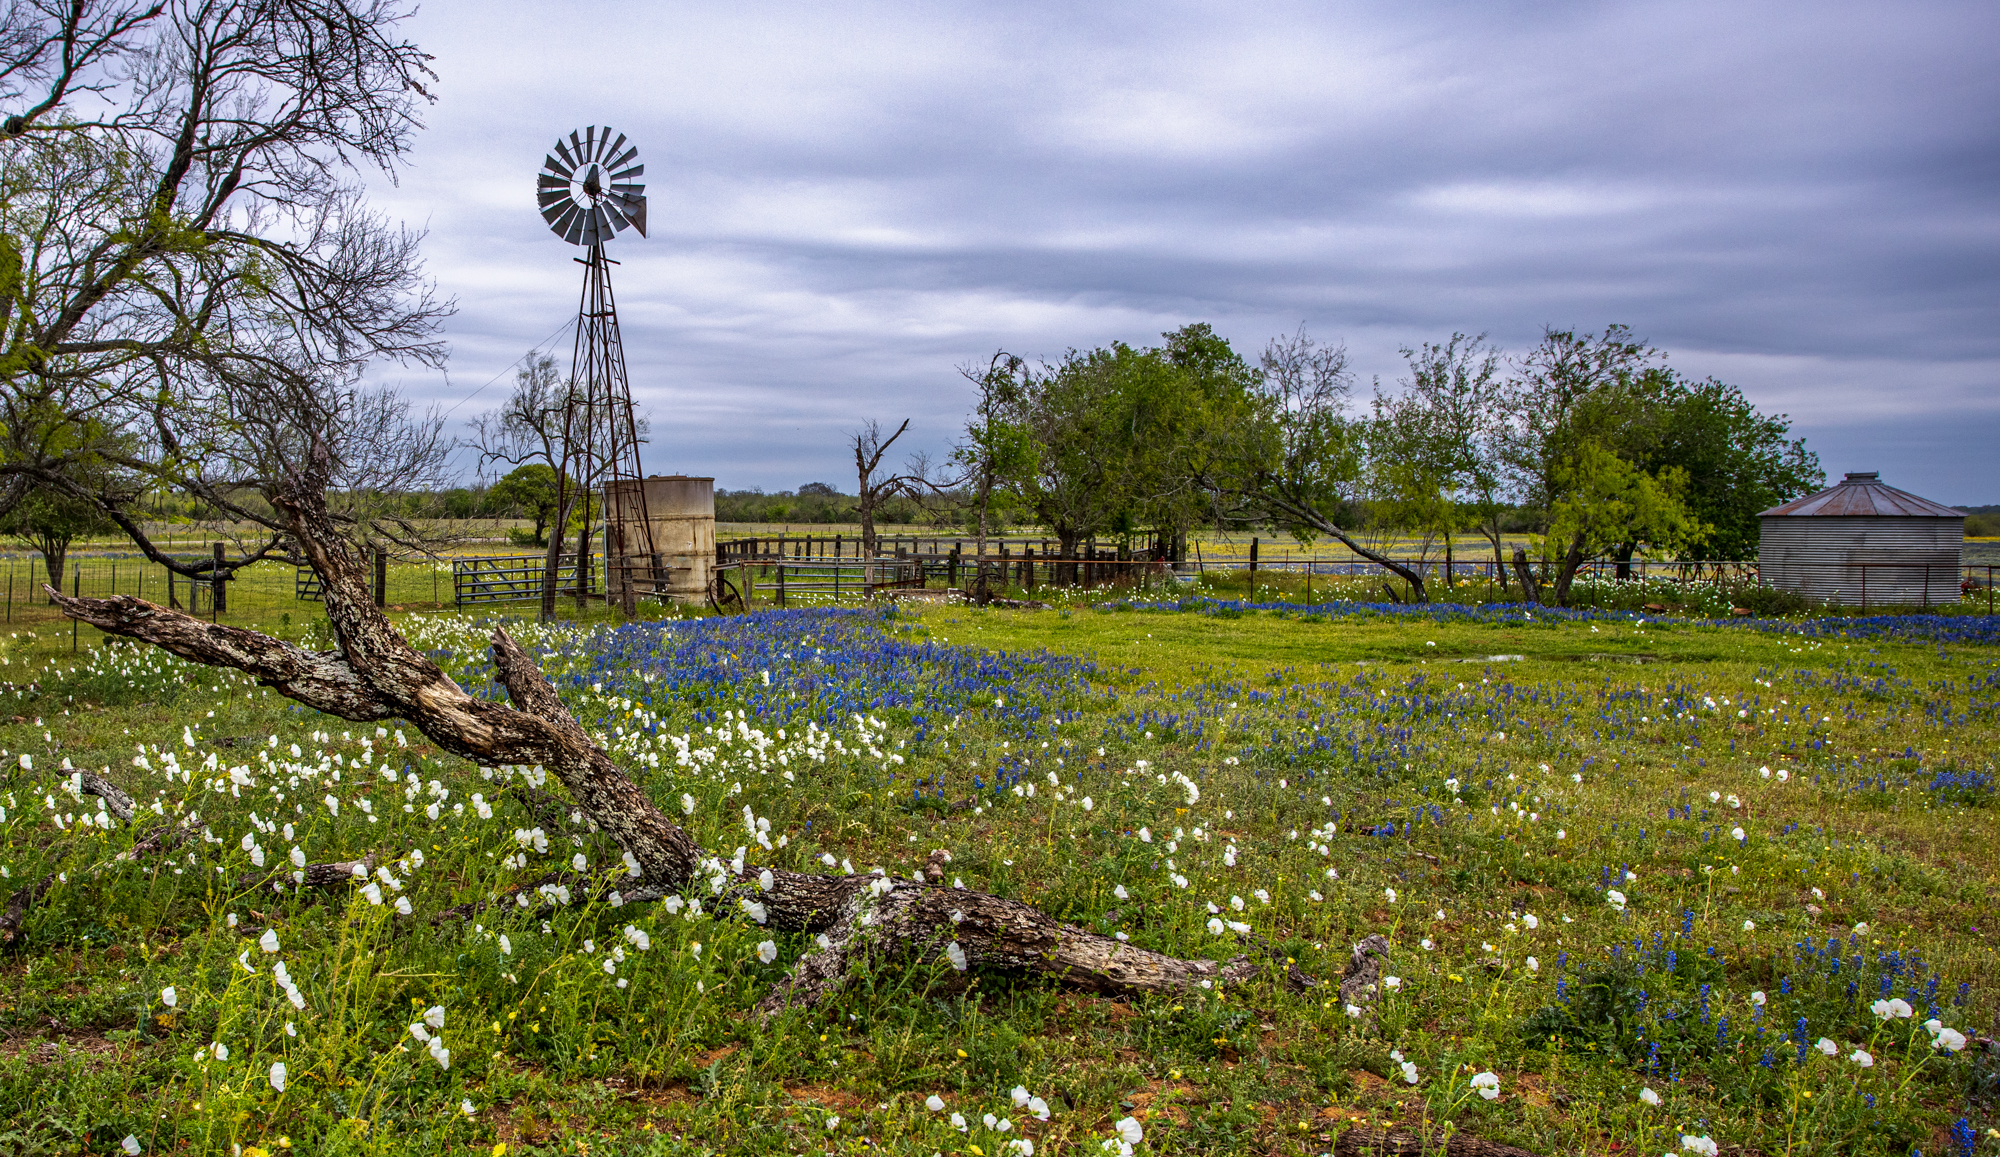 Farm and large tree branch are surrounded in an open field of bluebonnets and wildflowers 